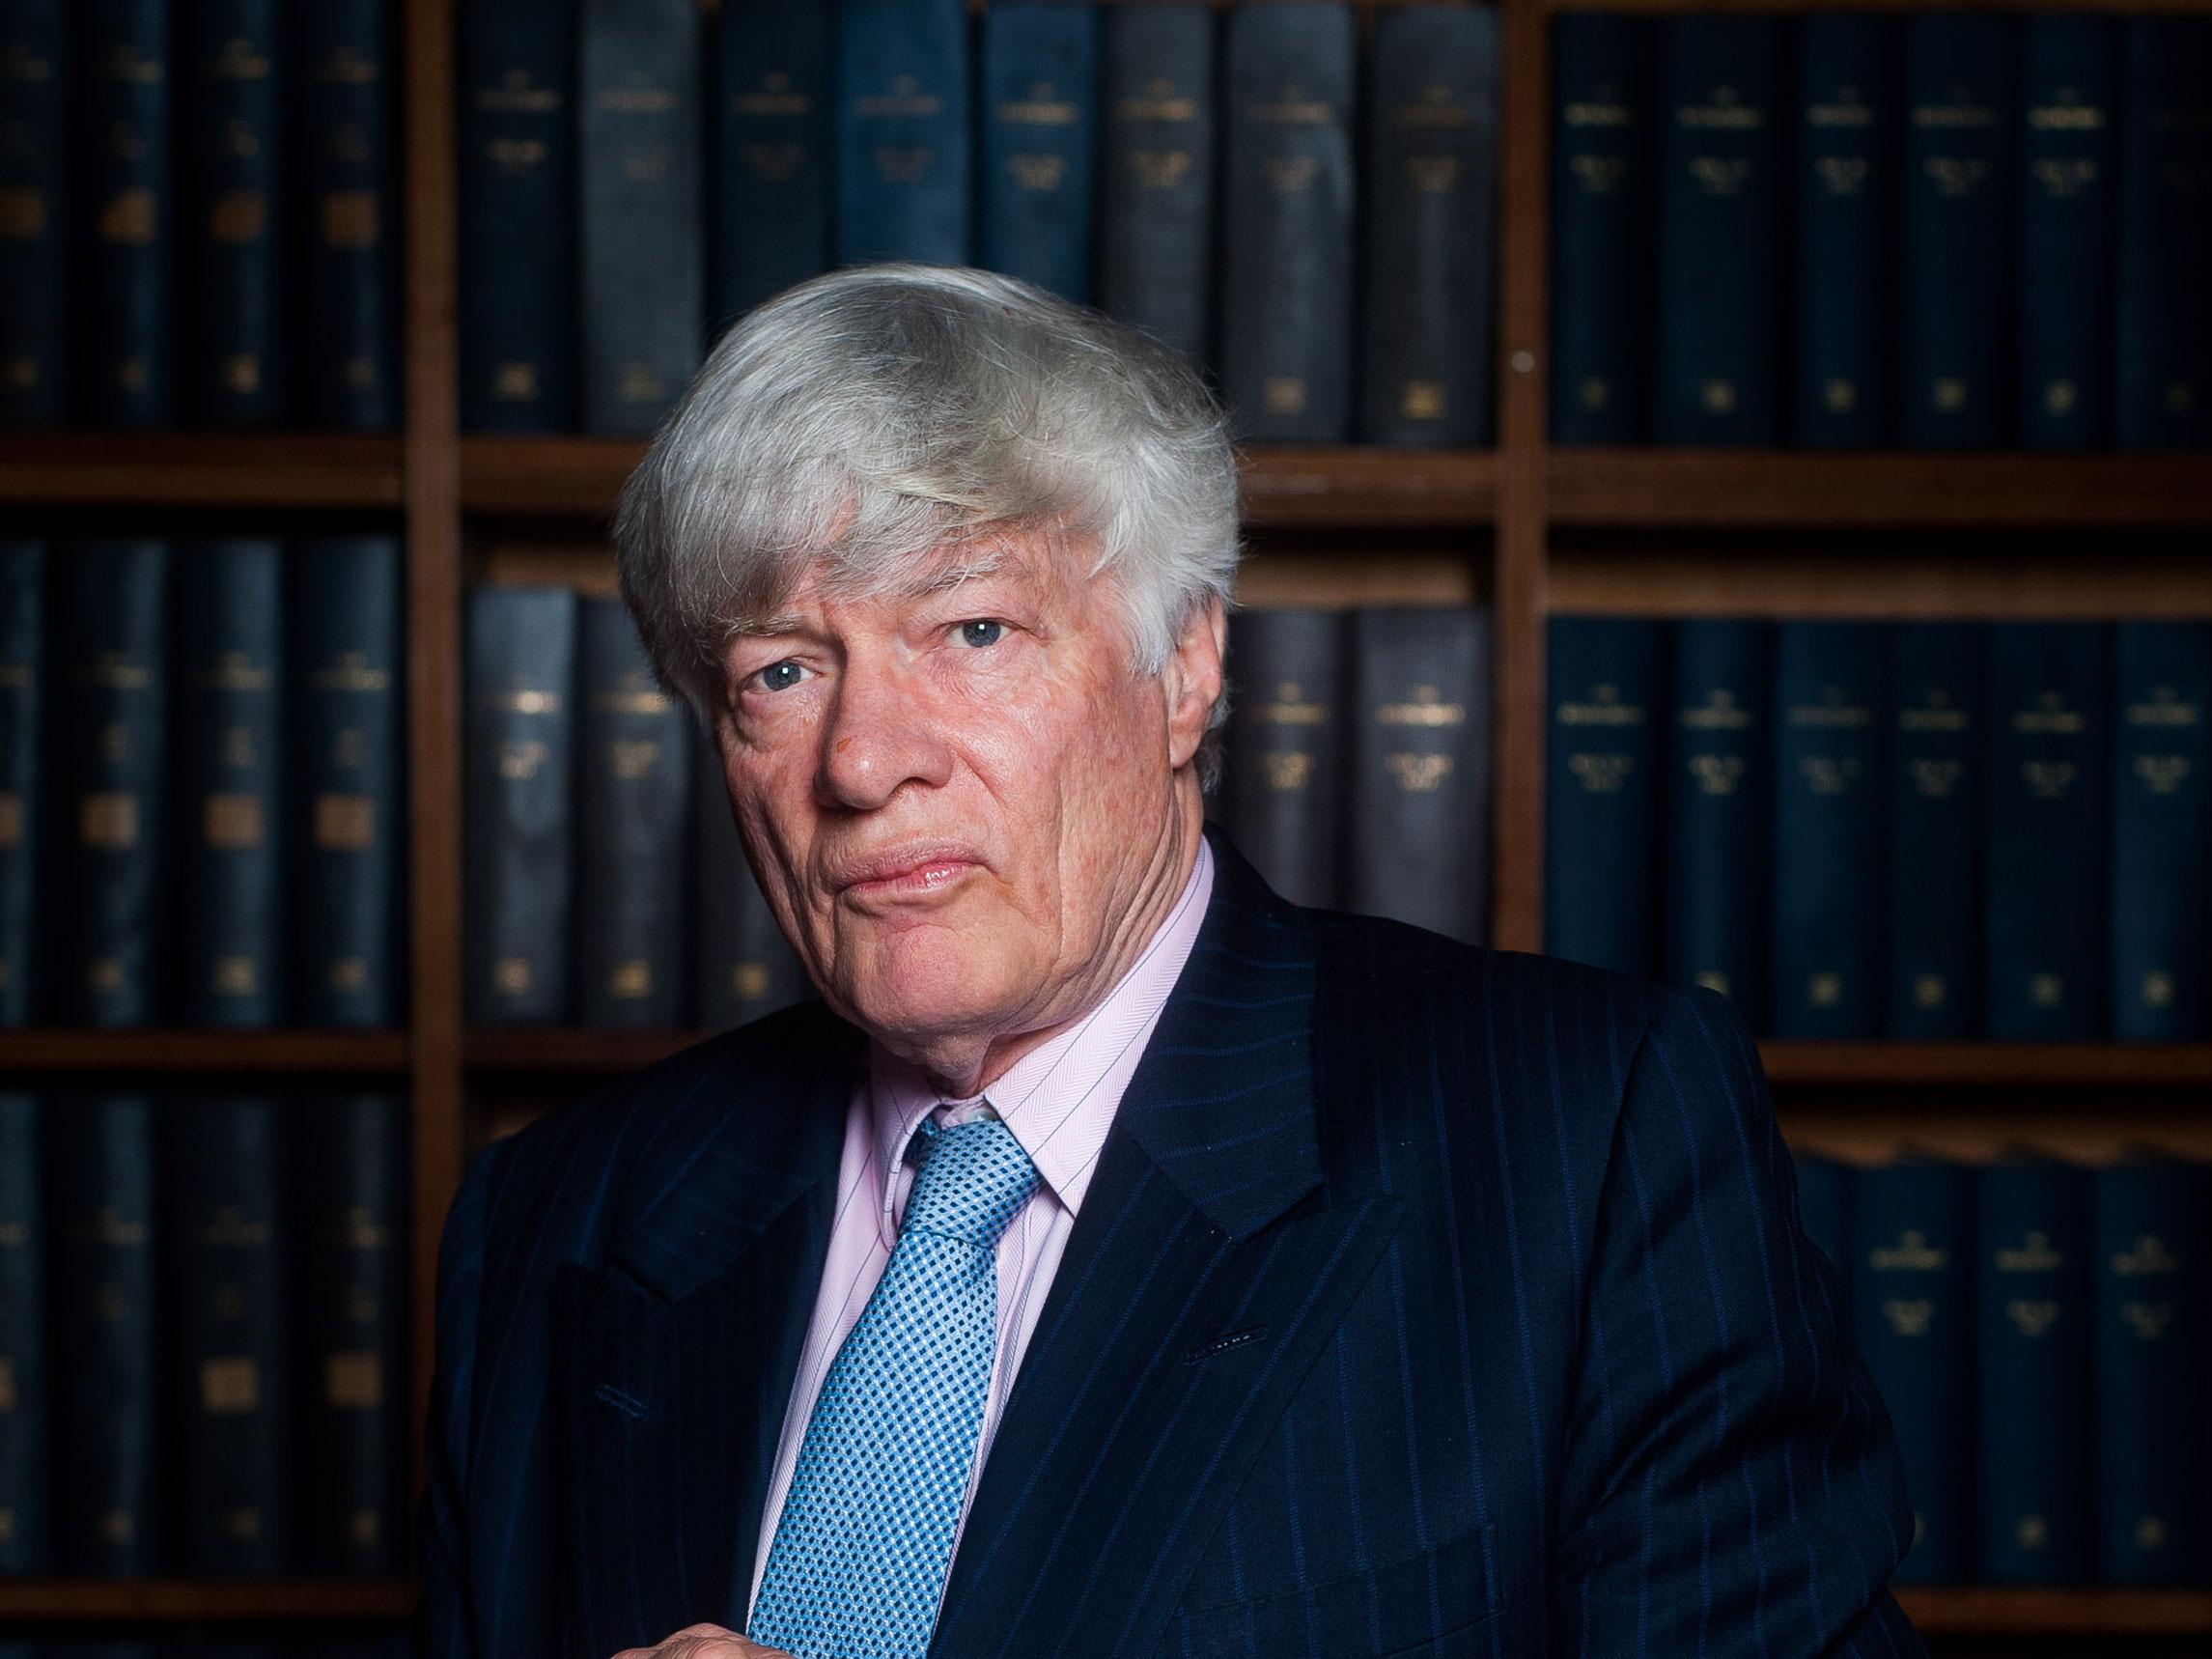 Geoffrey Robertson QC says the UK parliament must vote to repeal the 1972 European Communities Act before the country can leave the European Union